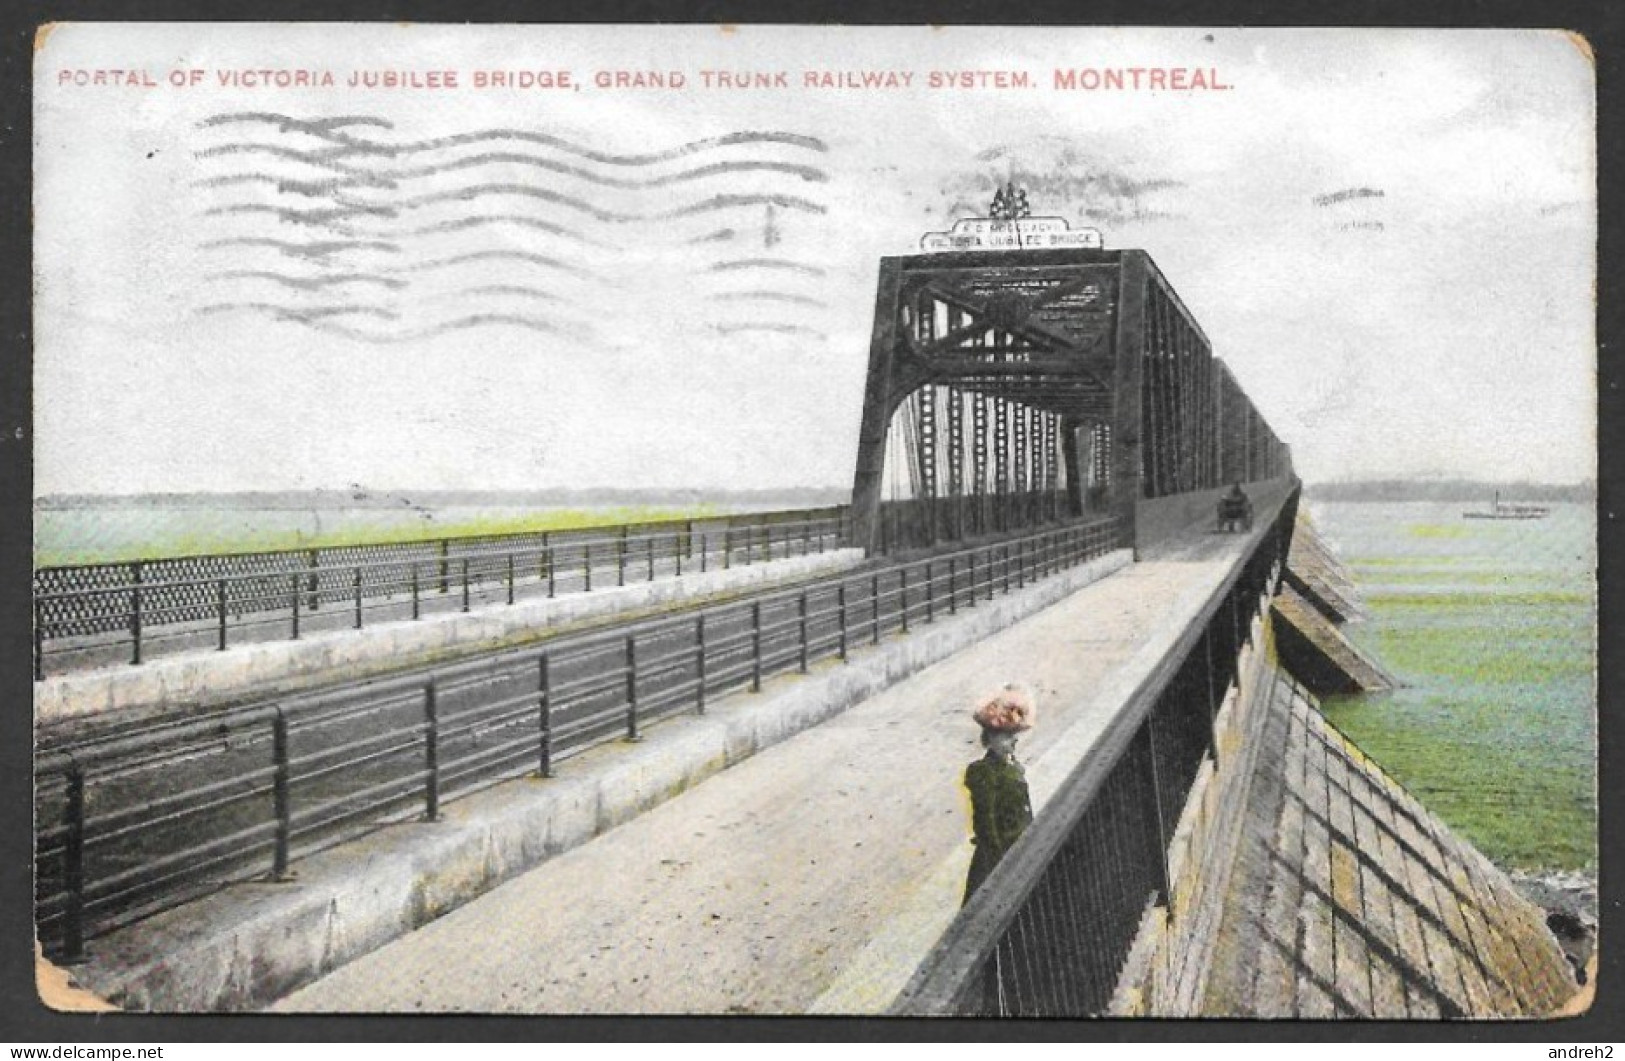 Montreal Quebec  C.PA. Postmarked 1907Portal Of Victoria  - Jumilee Bridge Grand Trunk Railway System - Montreal Import - Montreal